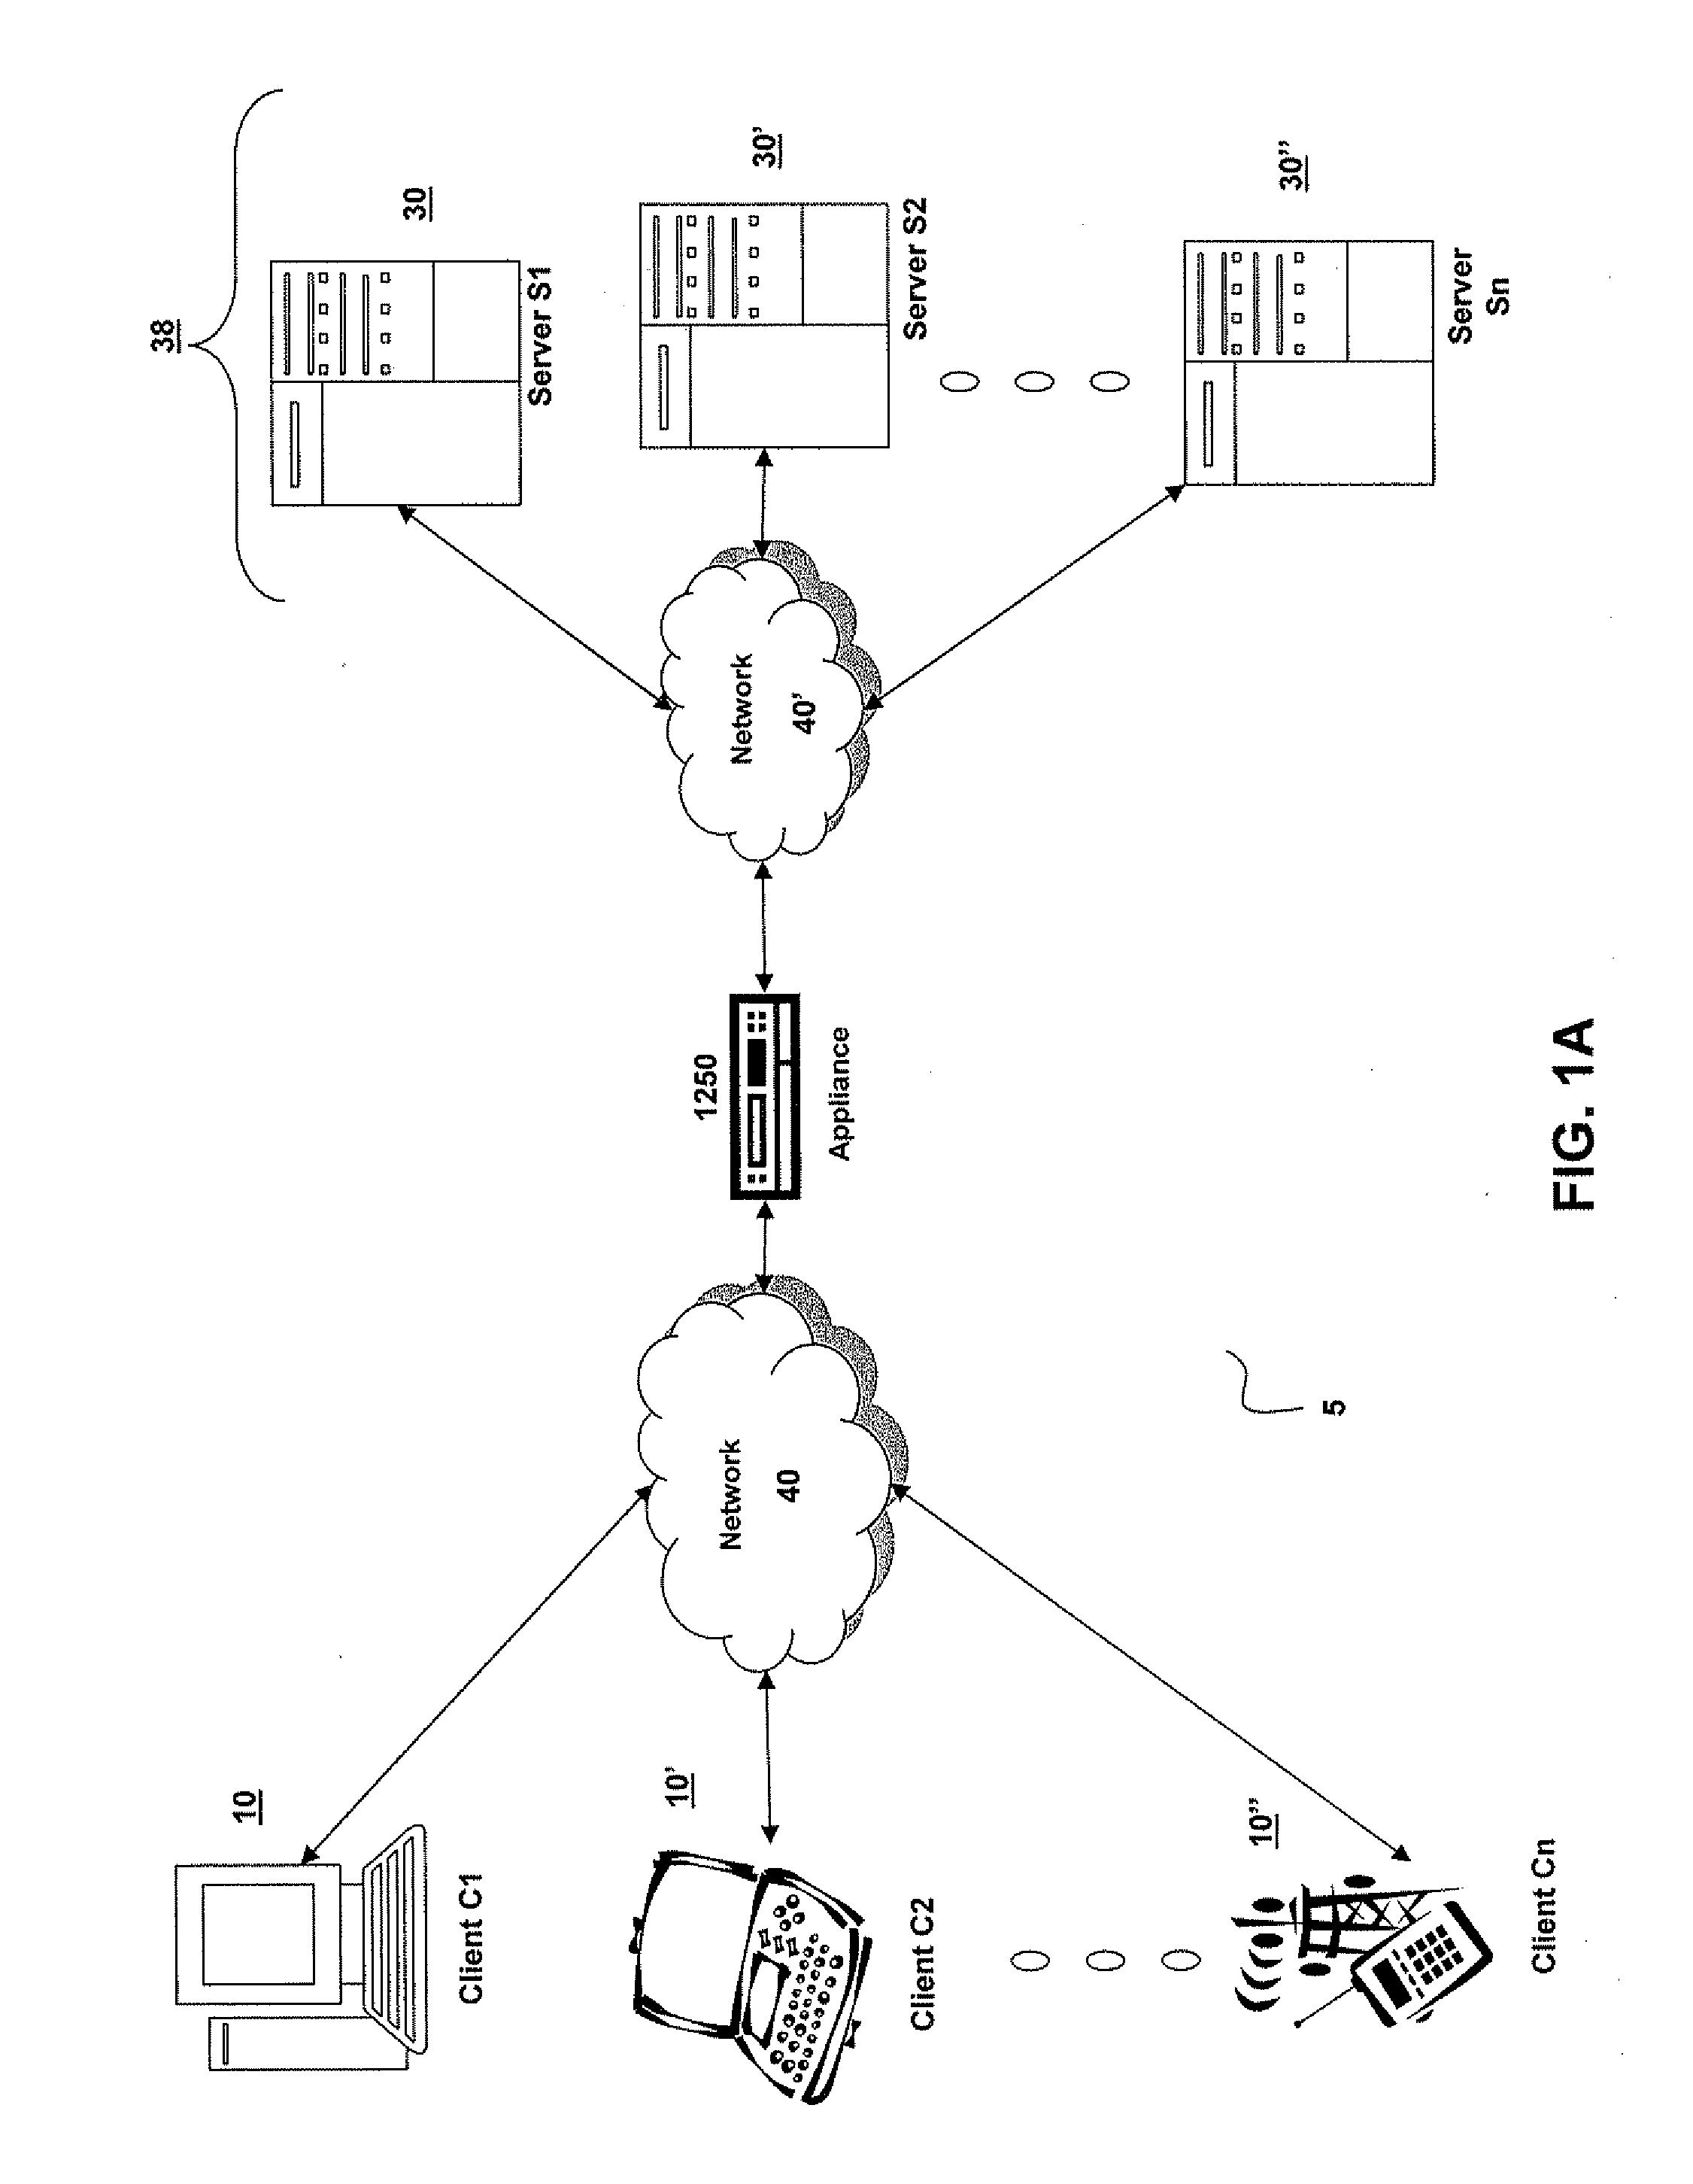 Systems and Methods for Providing Levels of Access and Action Control Via an SSL VPN Appliance